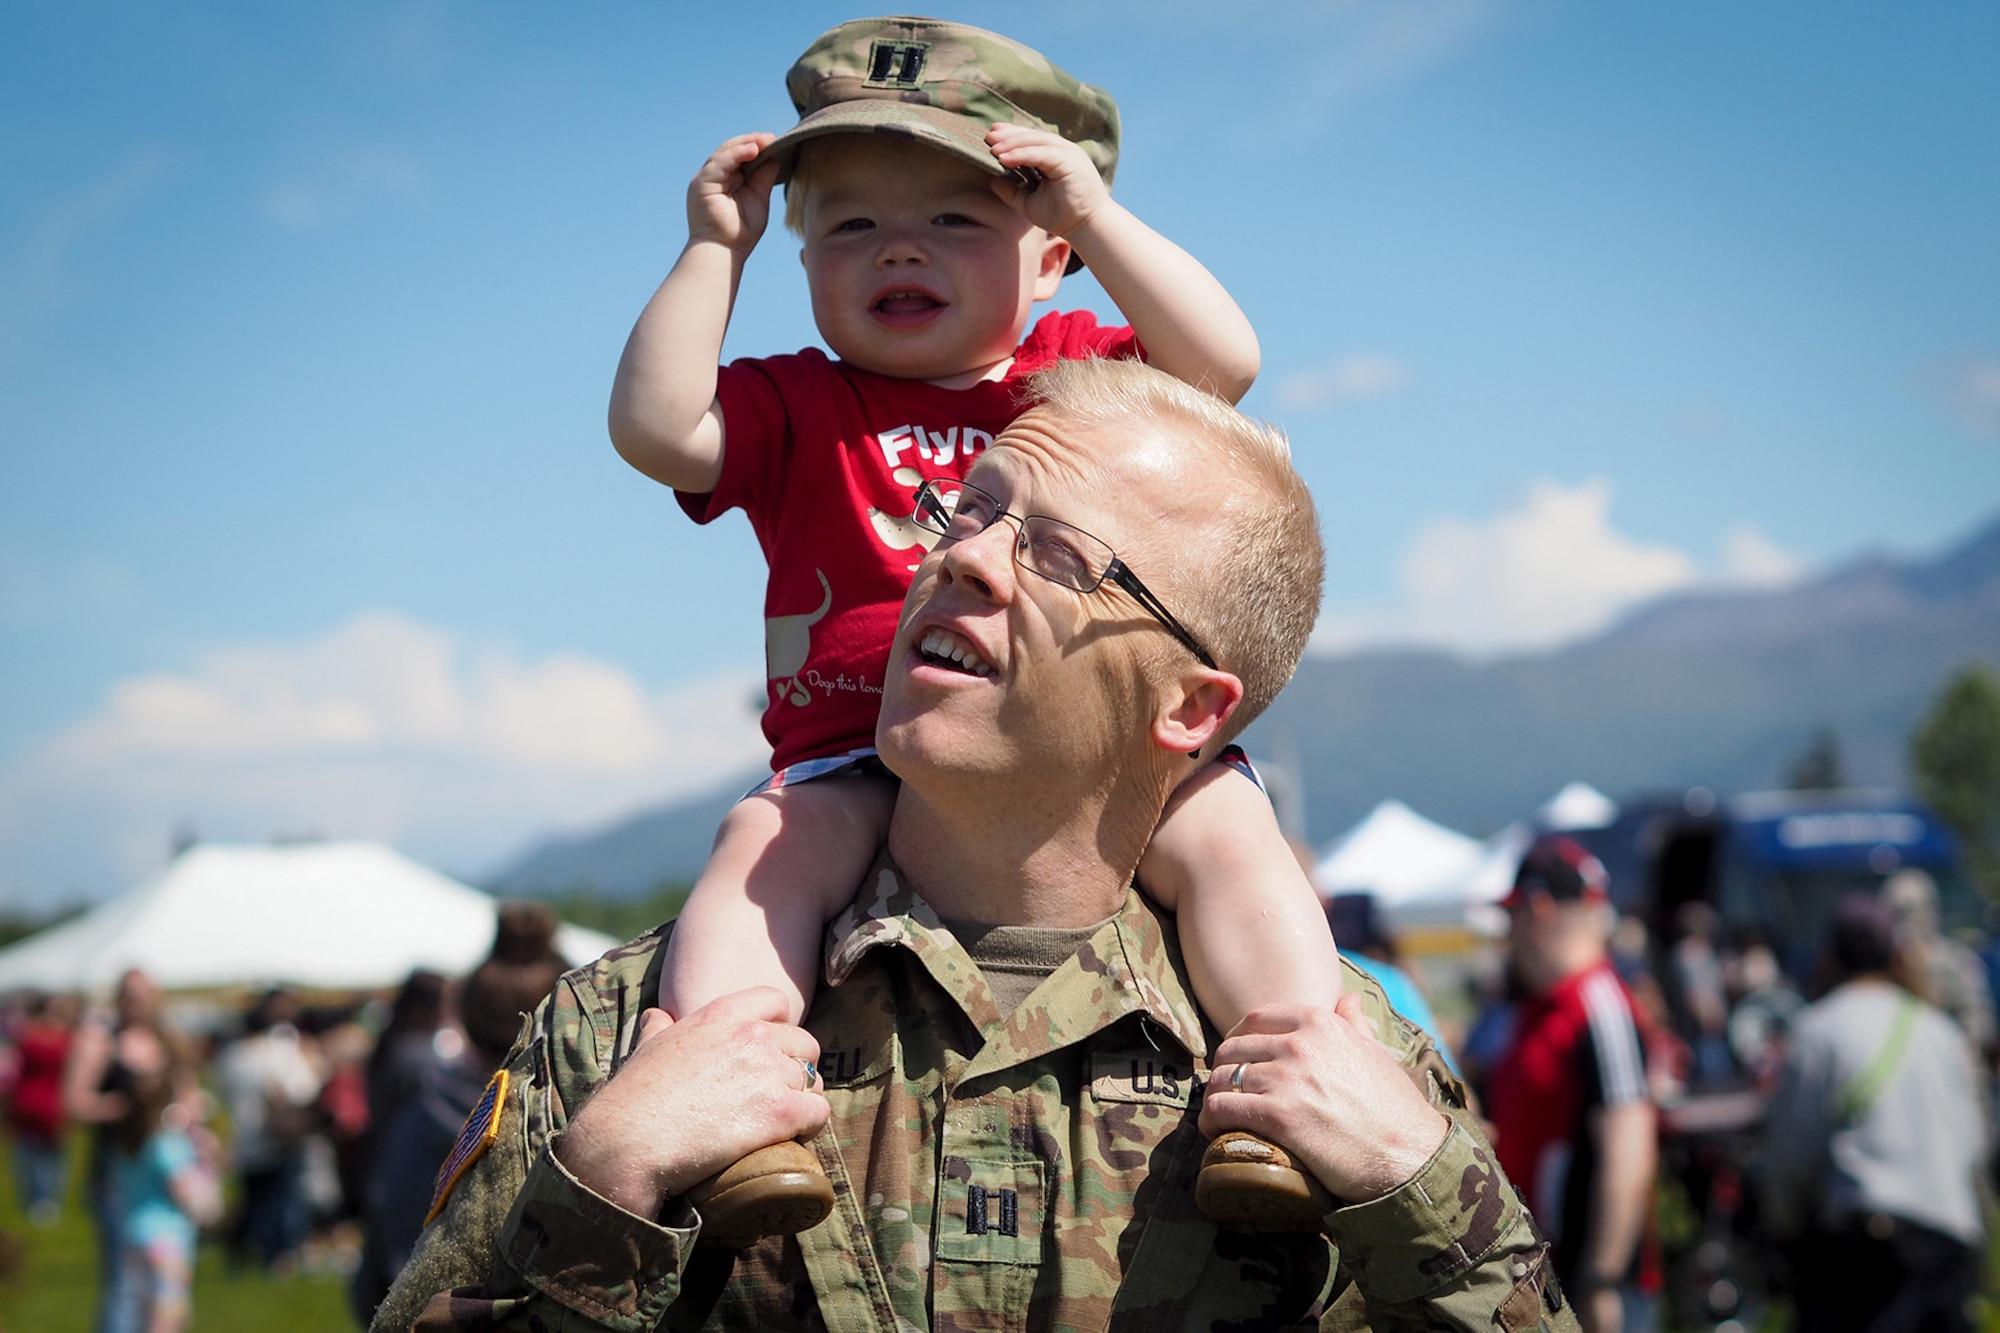 Army Capt. Ben Russell, carries his son Todd, 18-months-old, on his shoulders at the annual Military Appreciation Week picnic at the Joint Base Elmendorf-Richardson, Alaska, Buckner Fitness Center fields June 16, 2017. Several organizations came together to provide a variety of family-fun activities such as competitive sporting events for the adults, face painting and bouncy houses for the children in addition to the Anchorage Chamber of Commerce-provided food and music during the annual event.